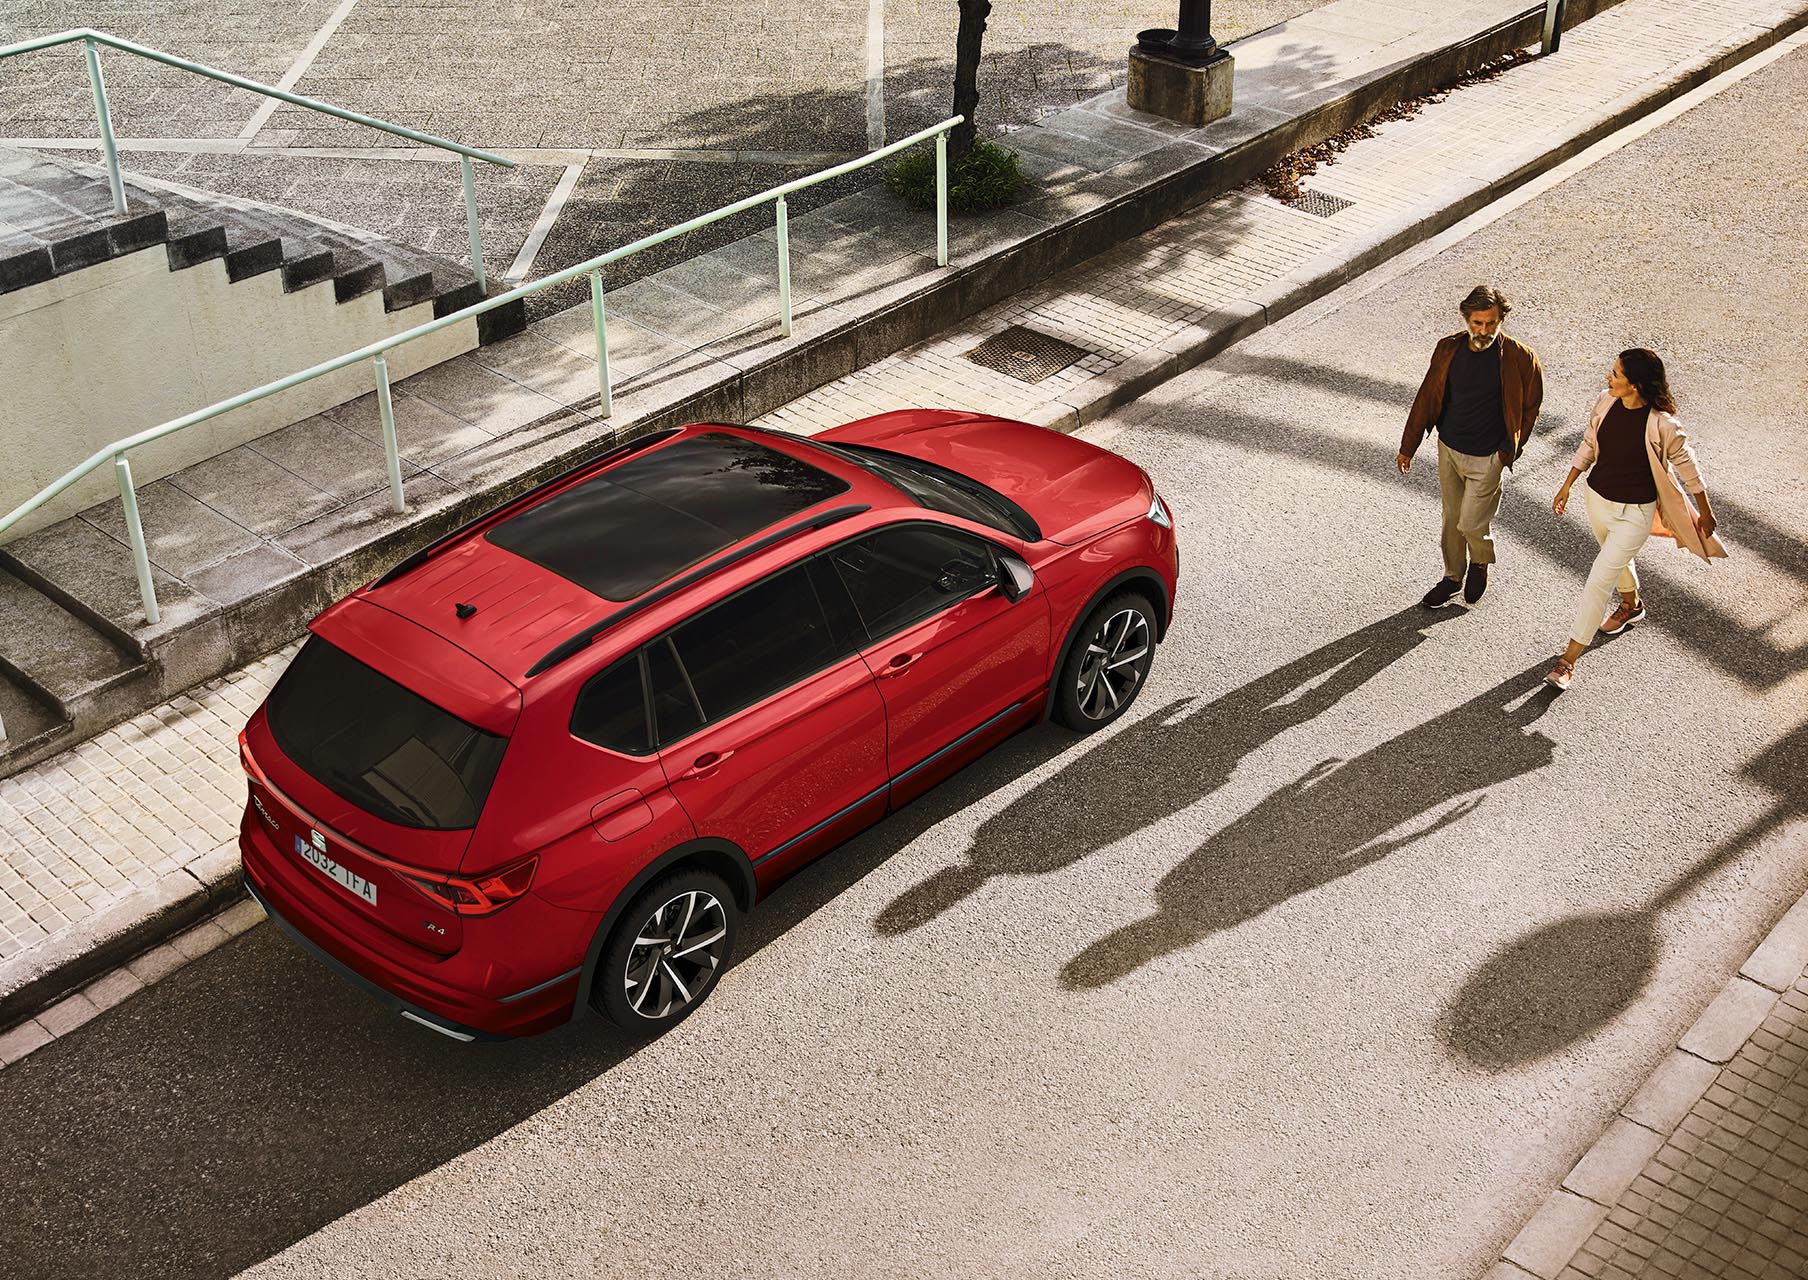 The red SEAT Tarraco with sunroof